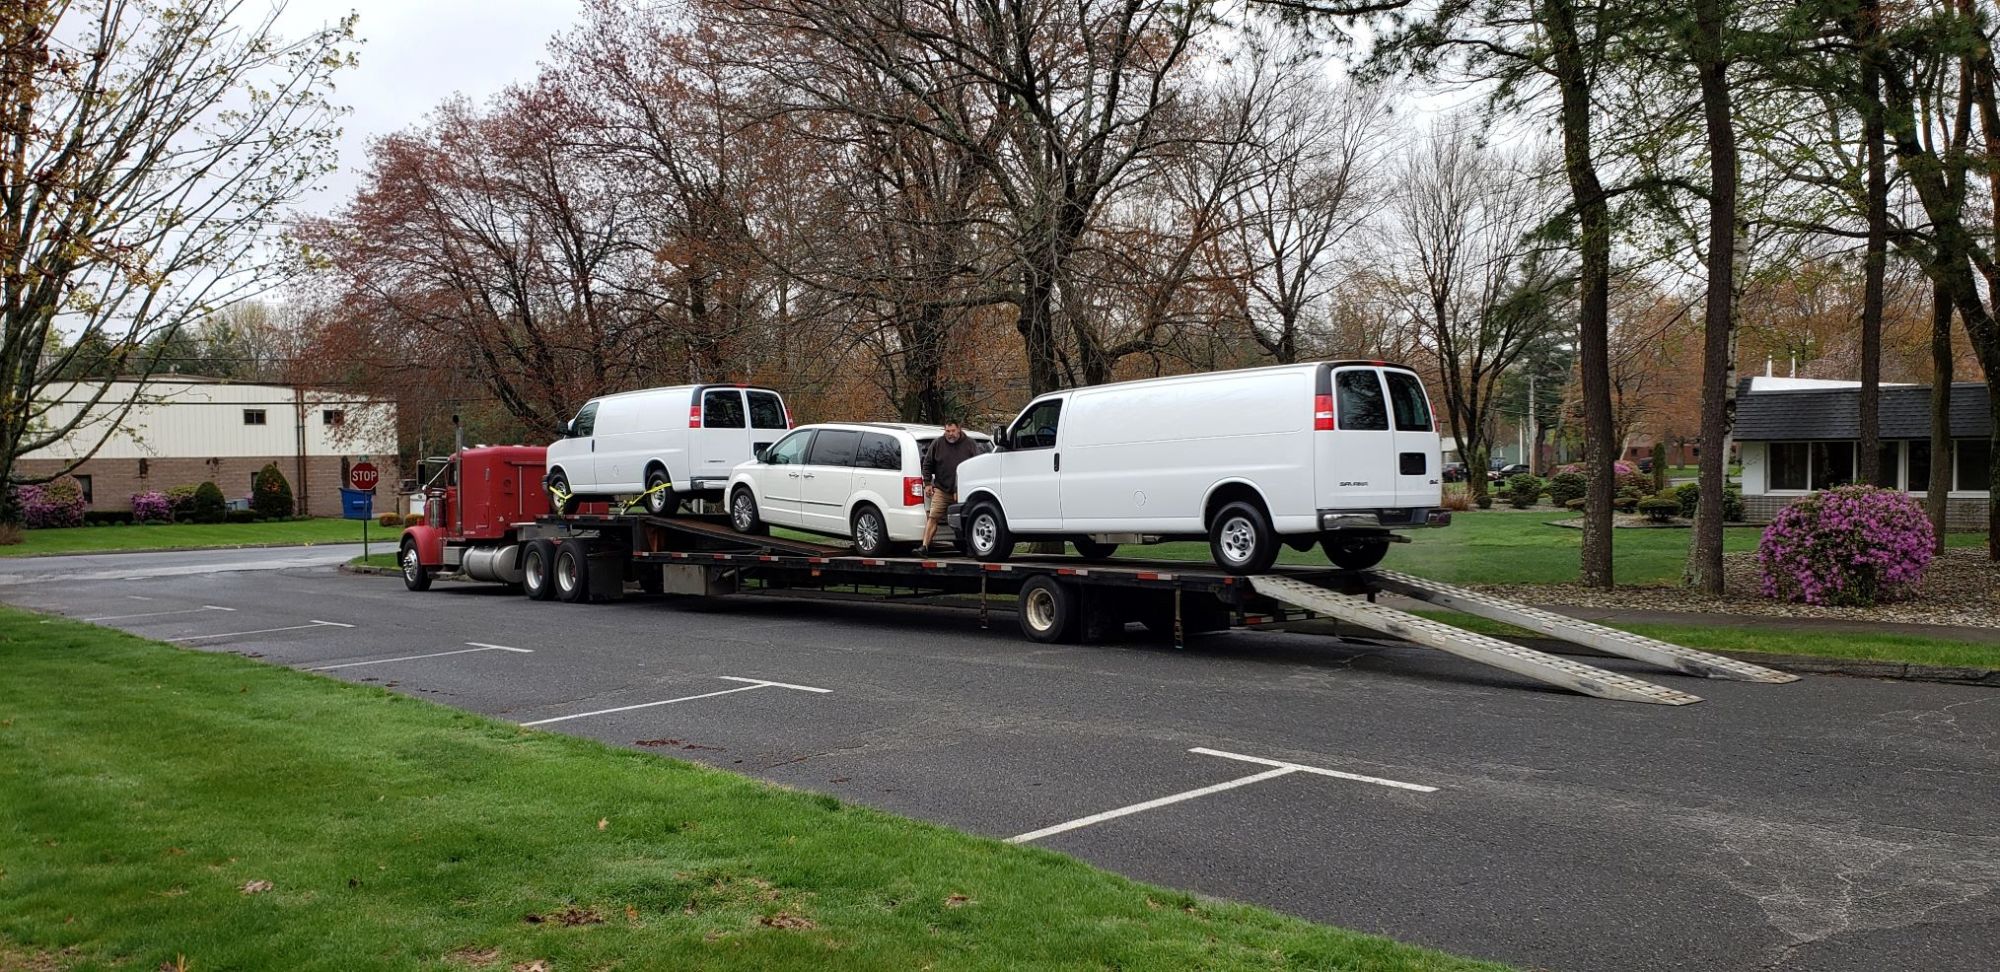 Central Virginia Carpet Cleaning Purchases New Butler Carpet Cleaning Equipment and Van!